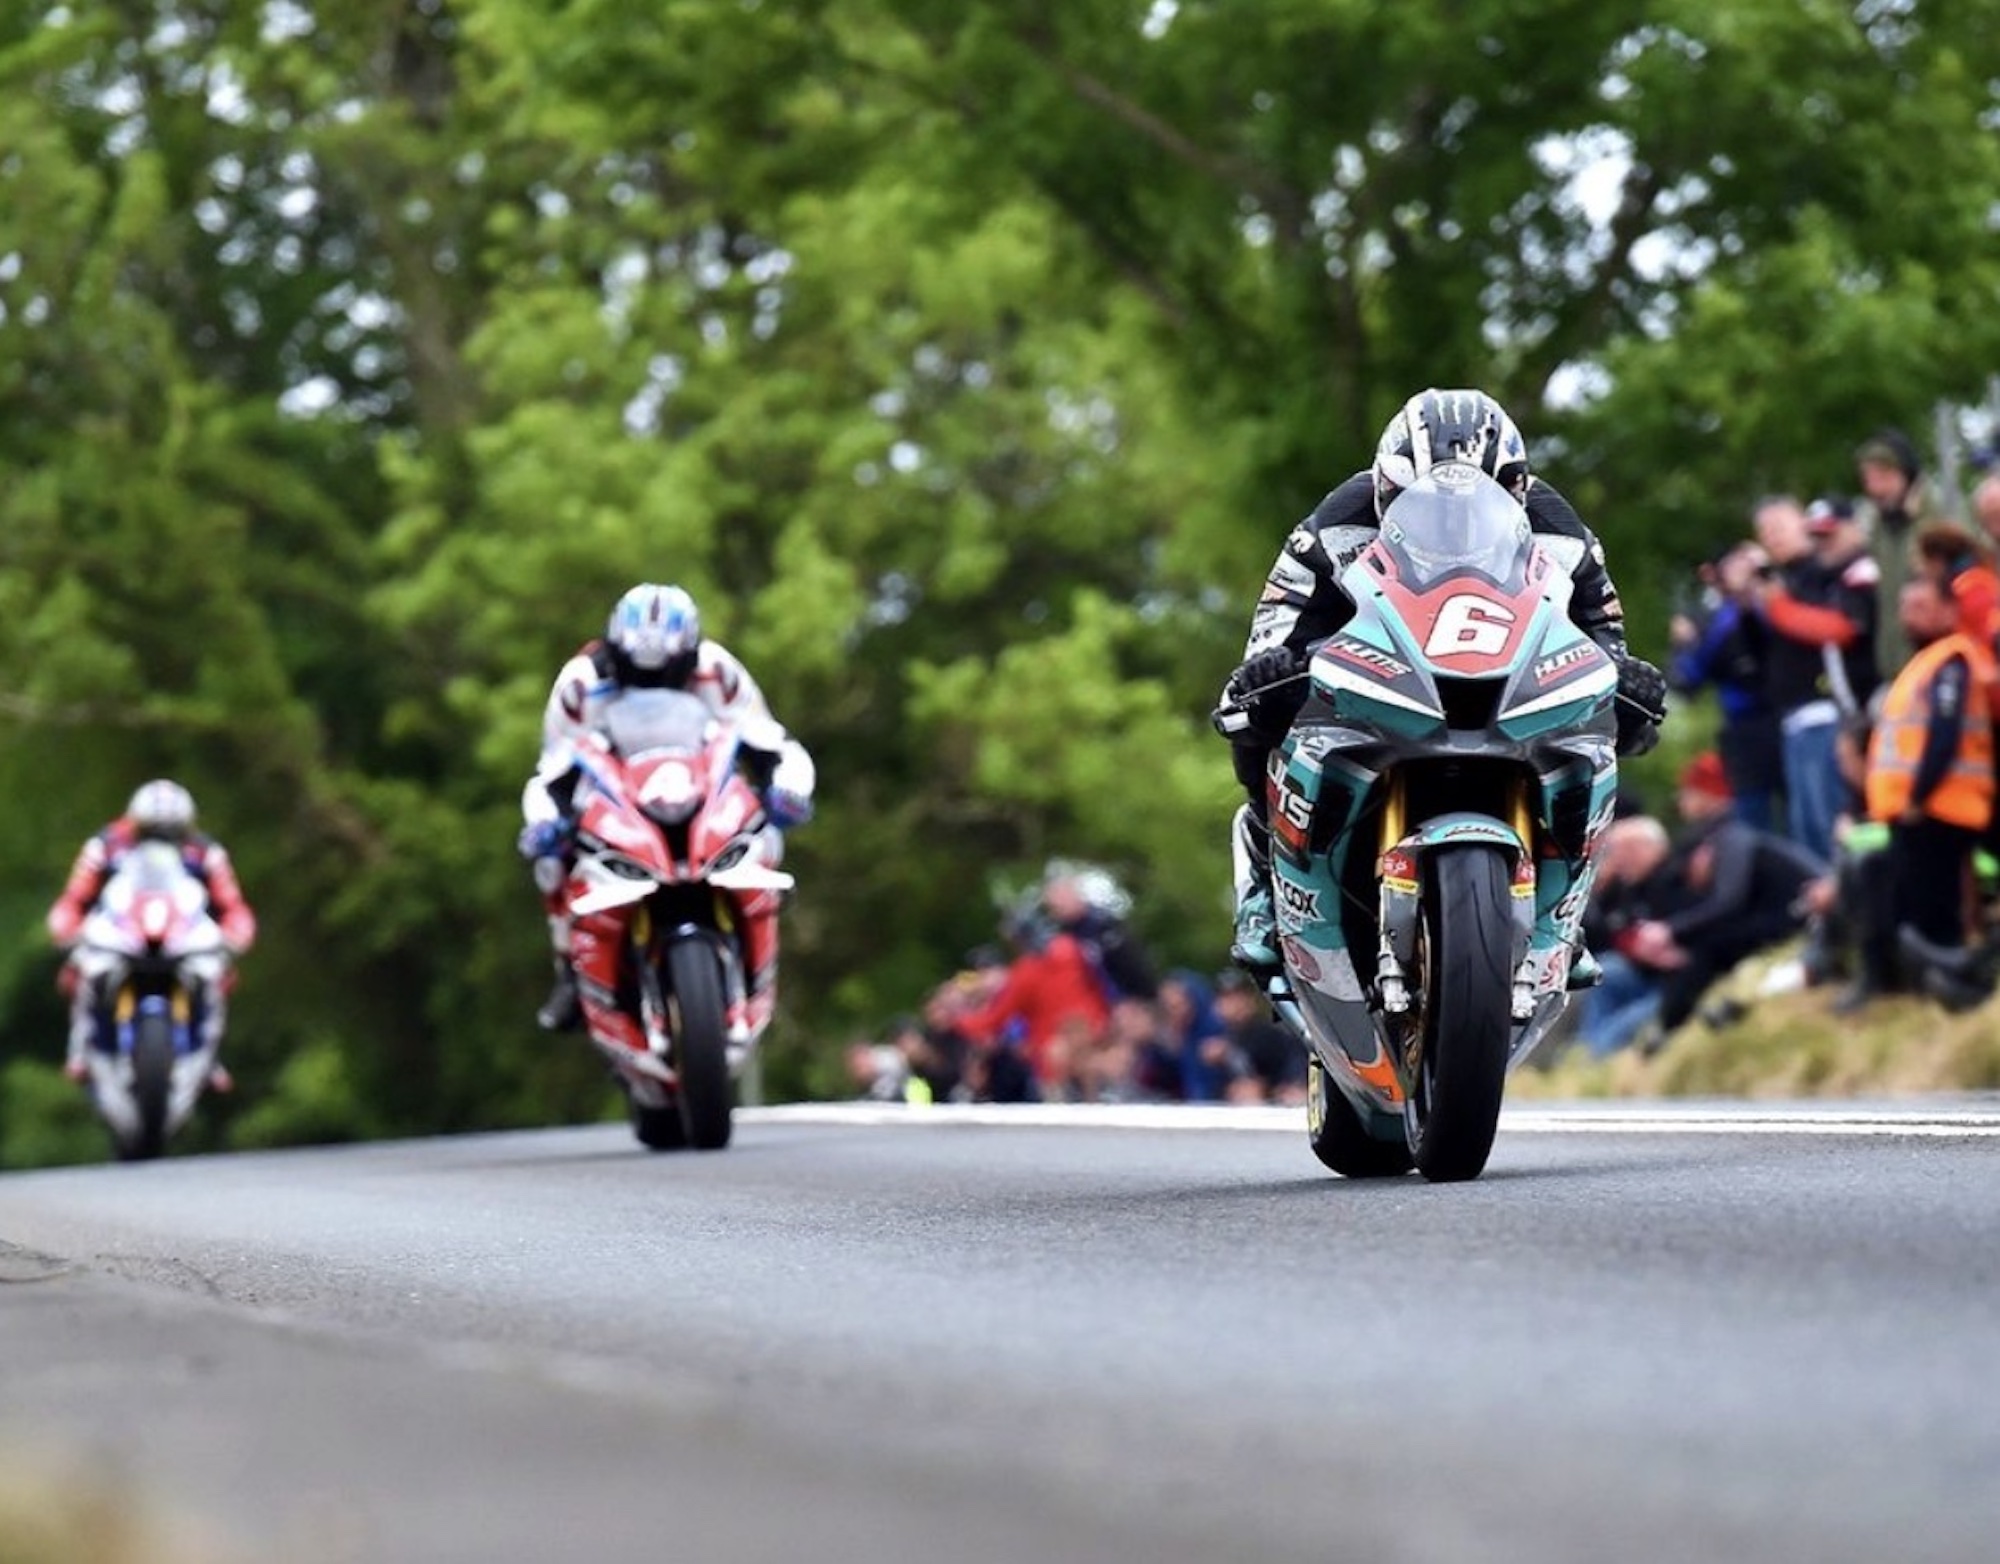 A racer in the Isle of Man TT. Media sourced from the Isle of Man TT.